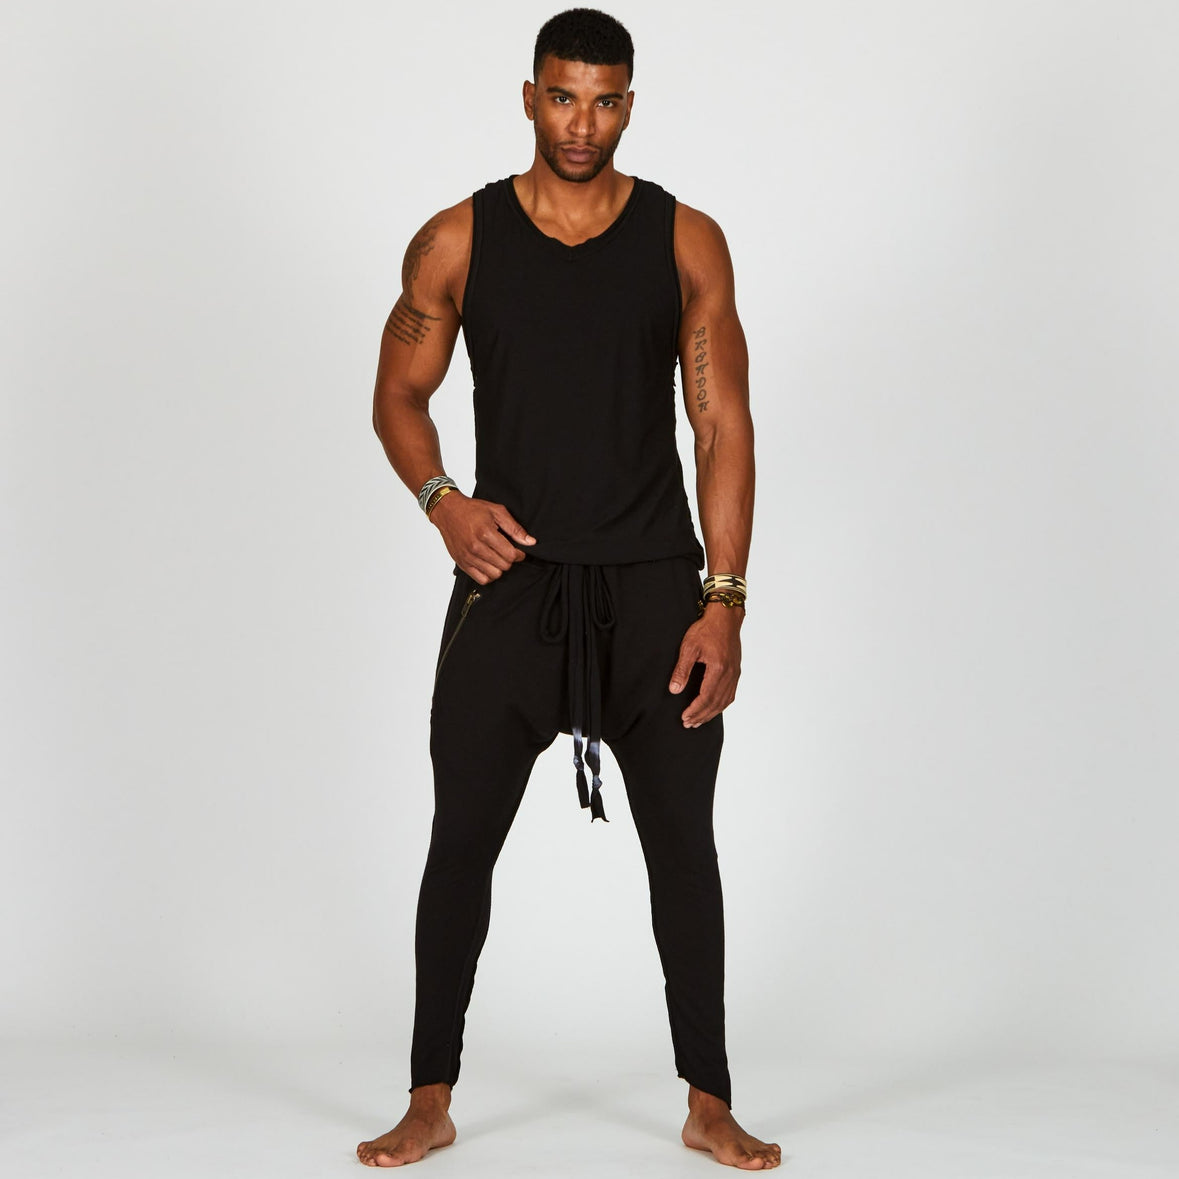 Stay stylish and comfortable in our activewear workout top